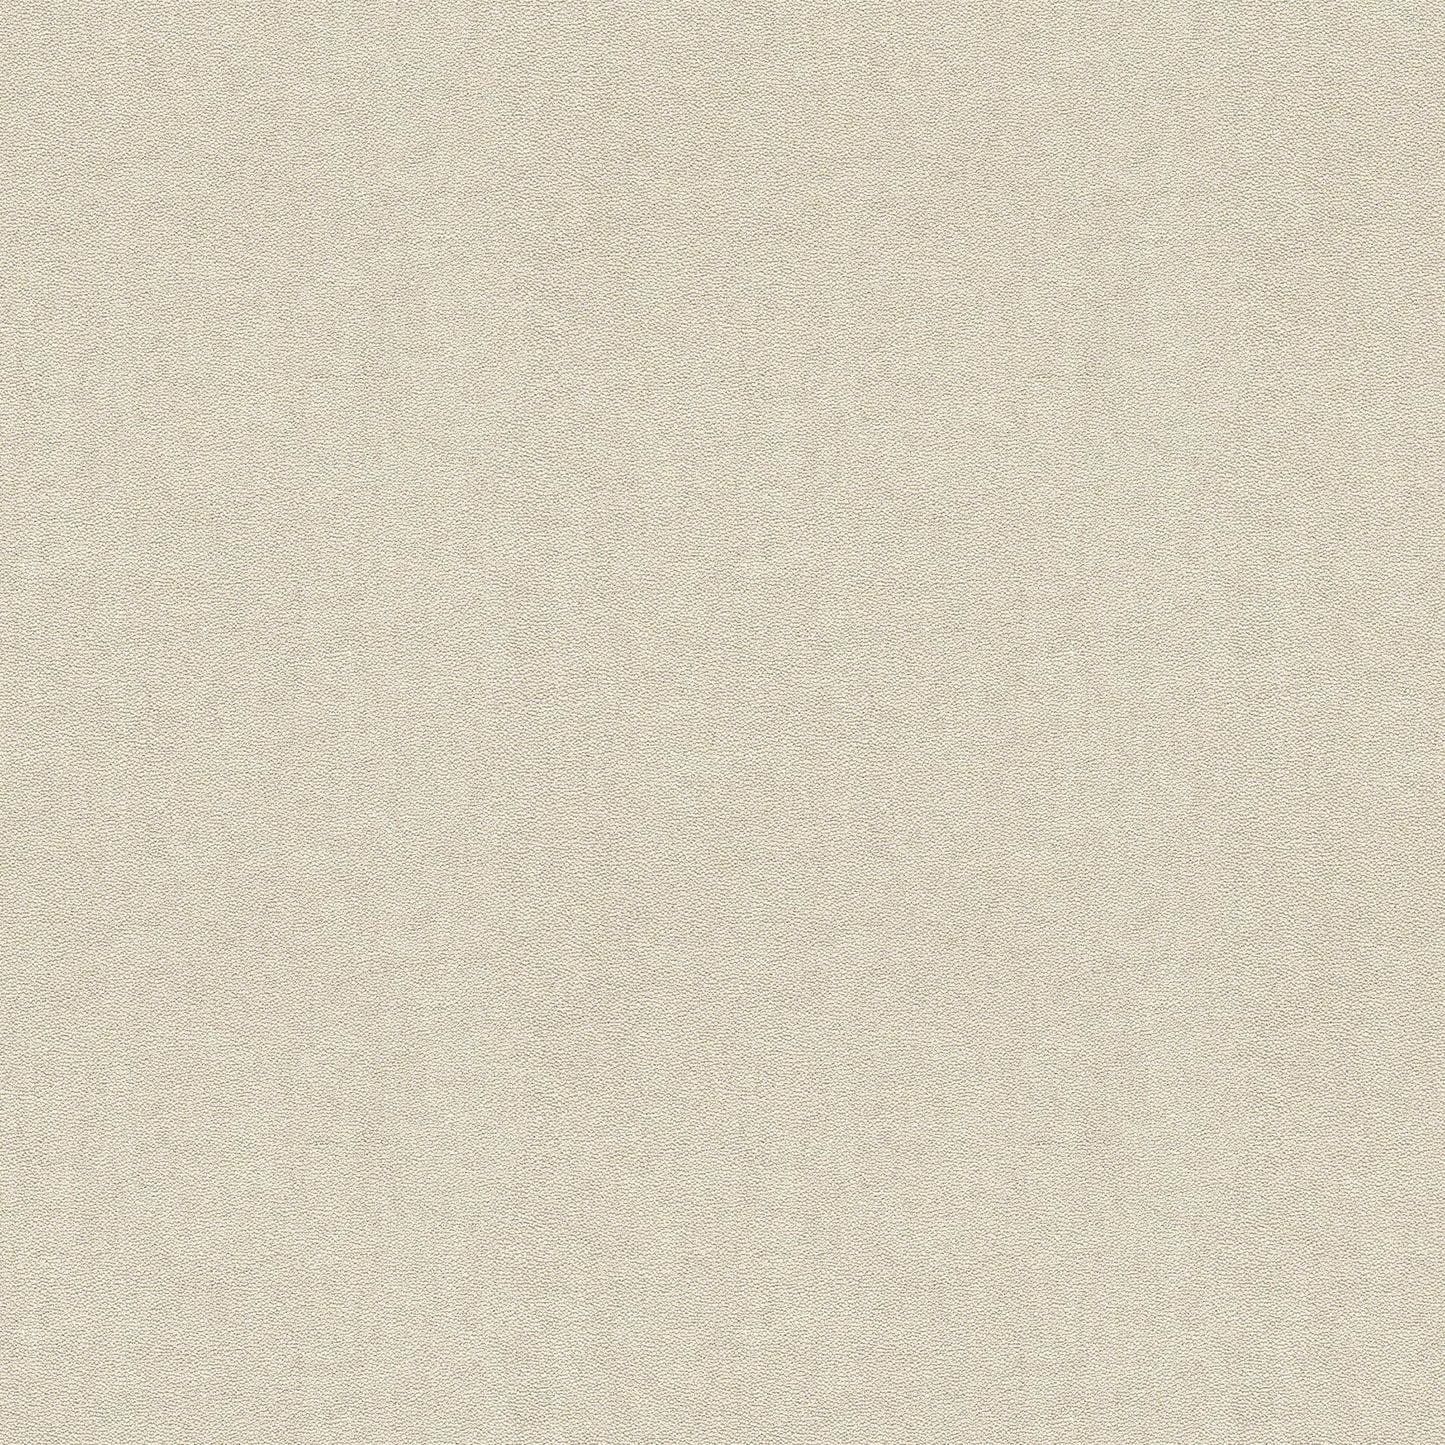 View 2835-C88650 Deluxe Neutrals Textured Wallpaper by Advantage